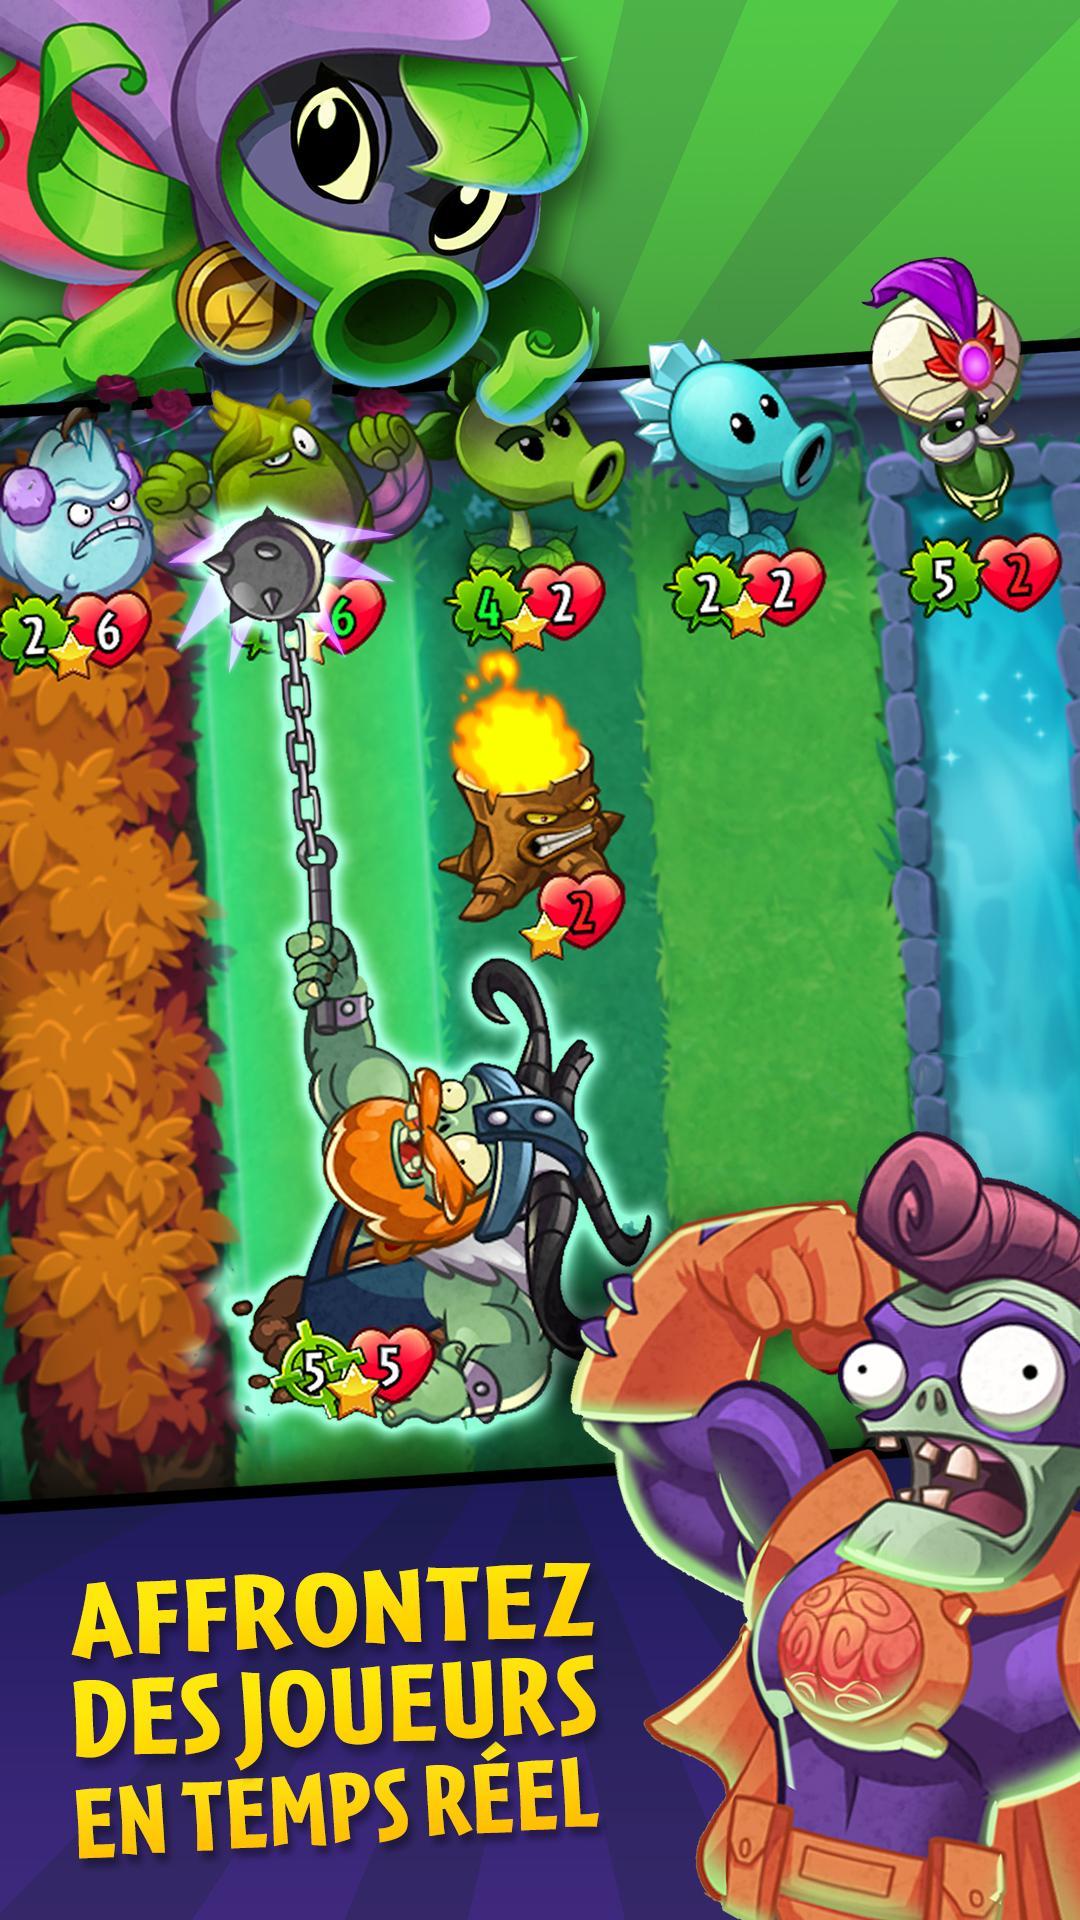 Plants vs. Zombies: Battle for Neighborville is the next 